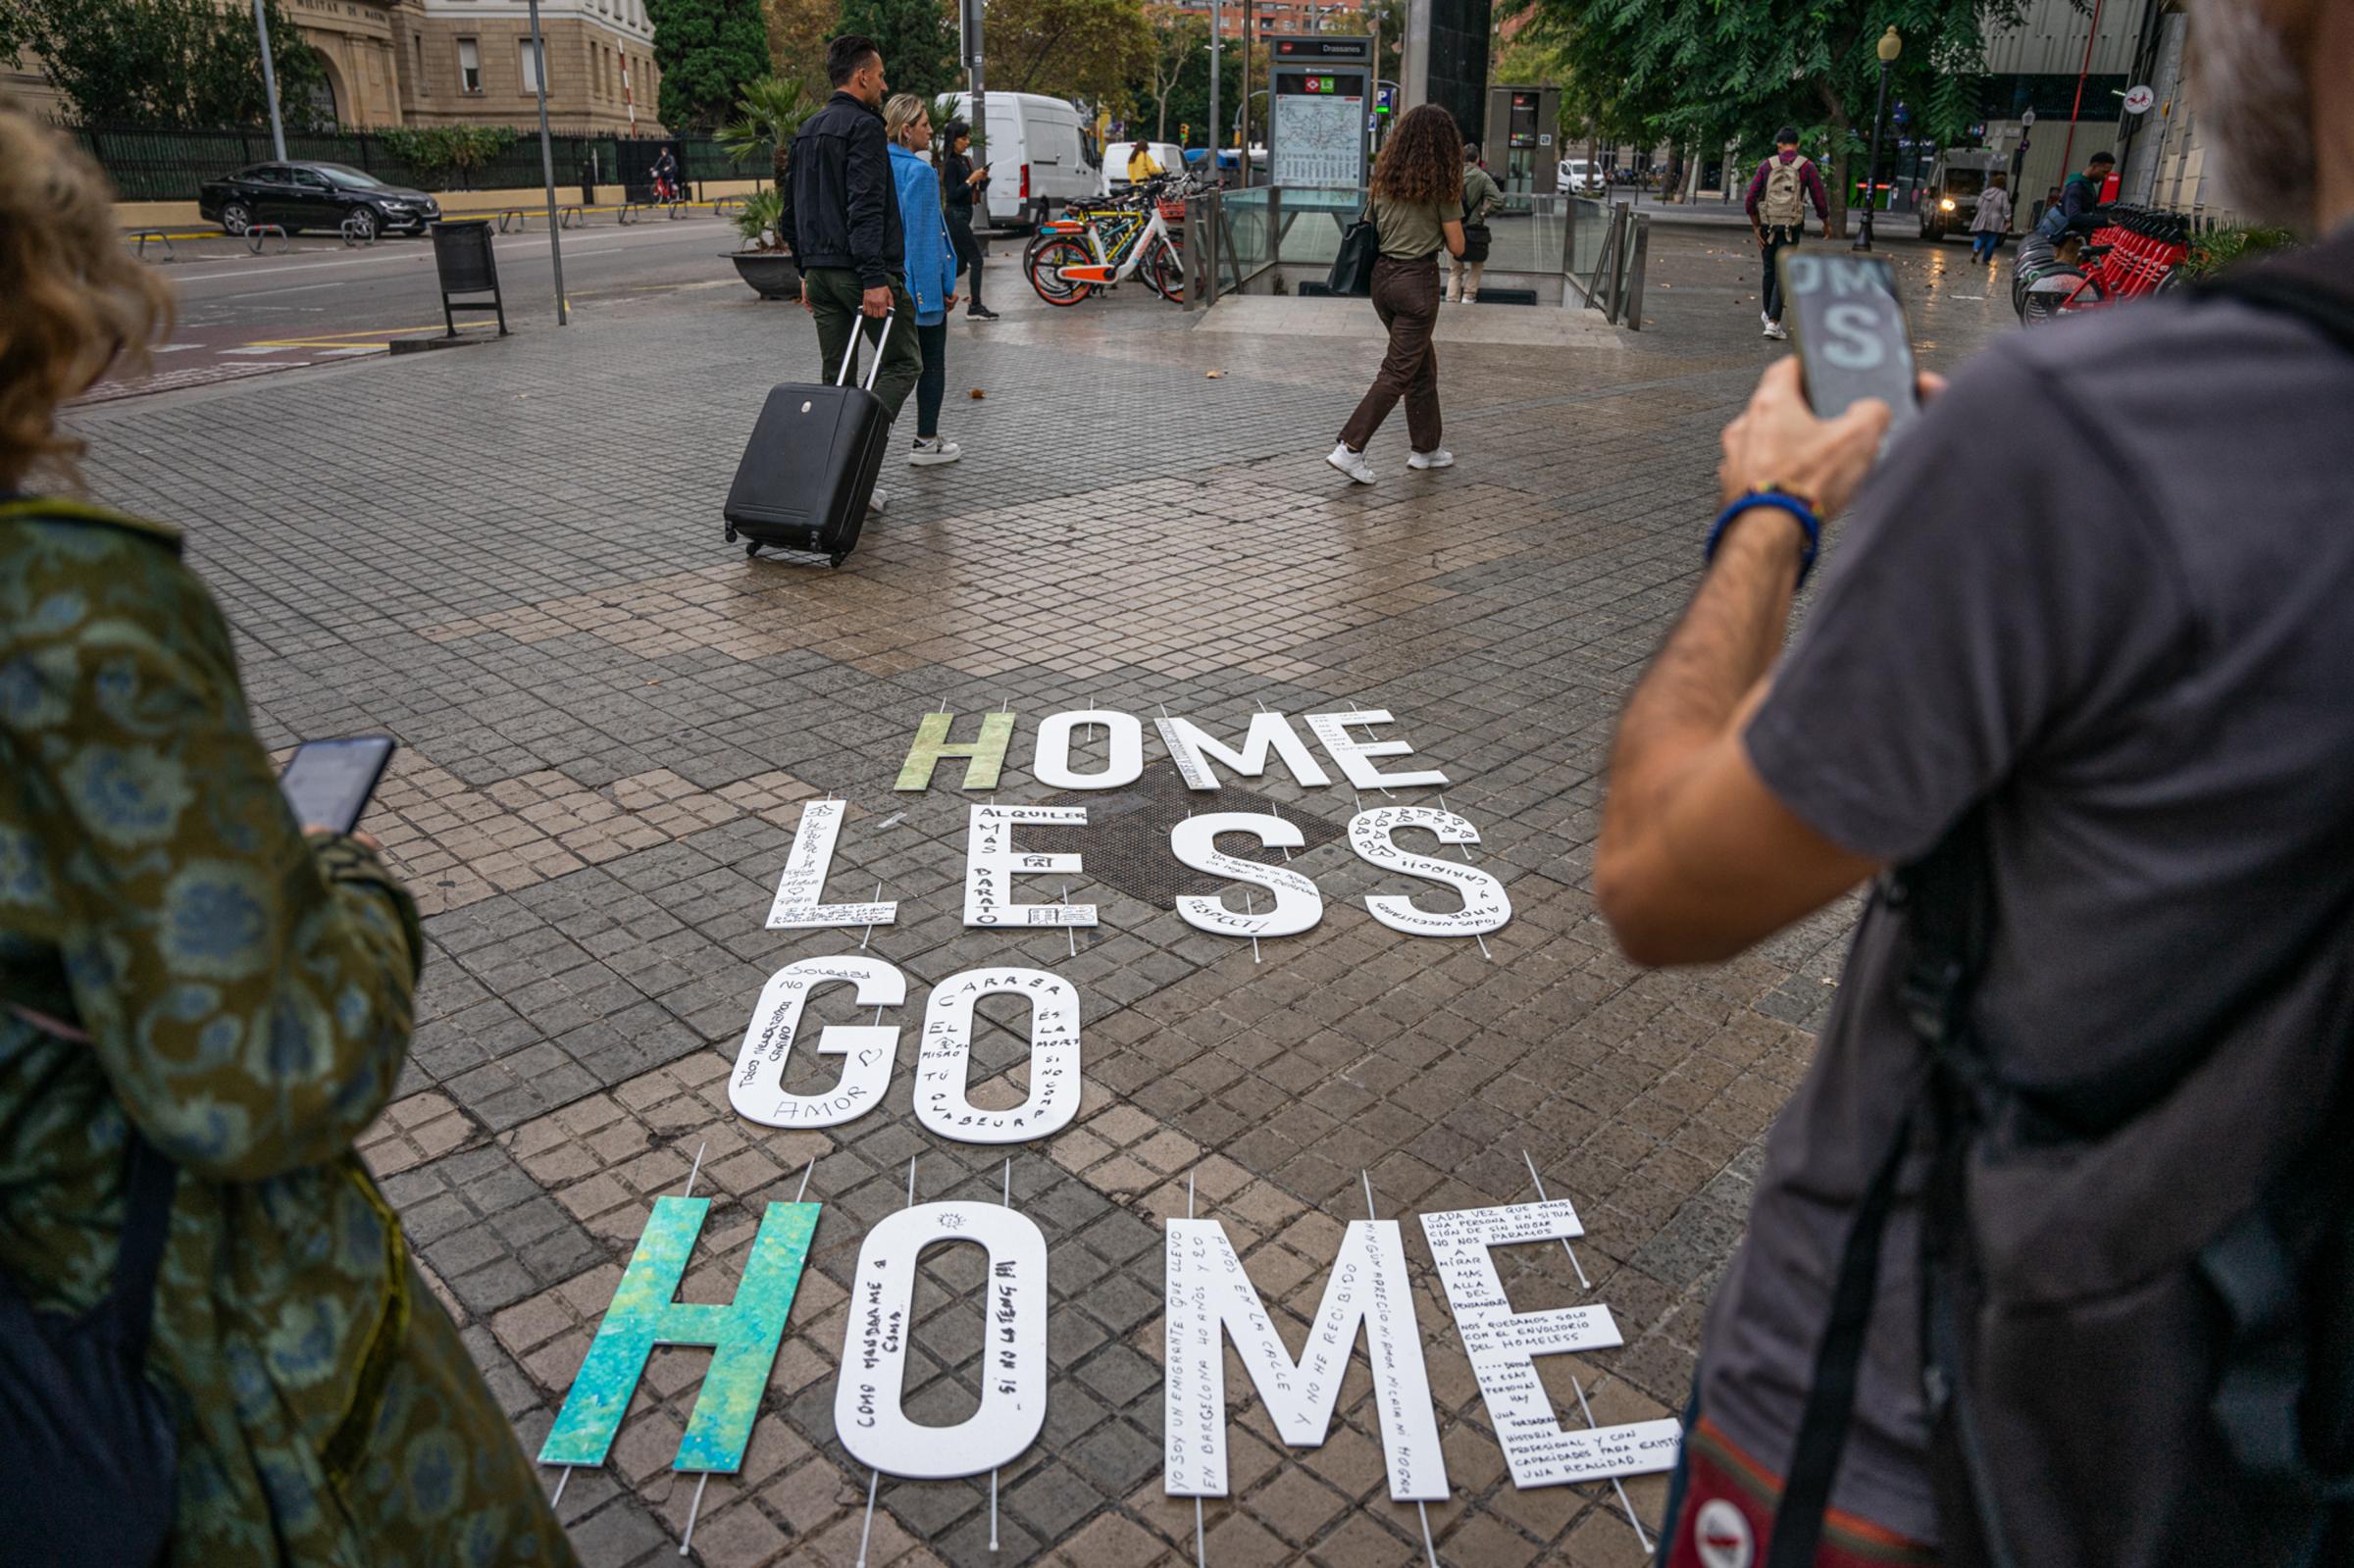 Daily news - People photograph the message "Homeless go...